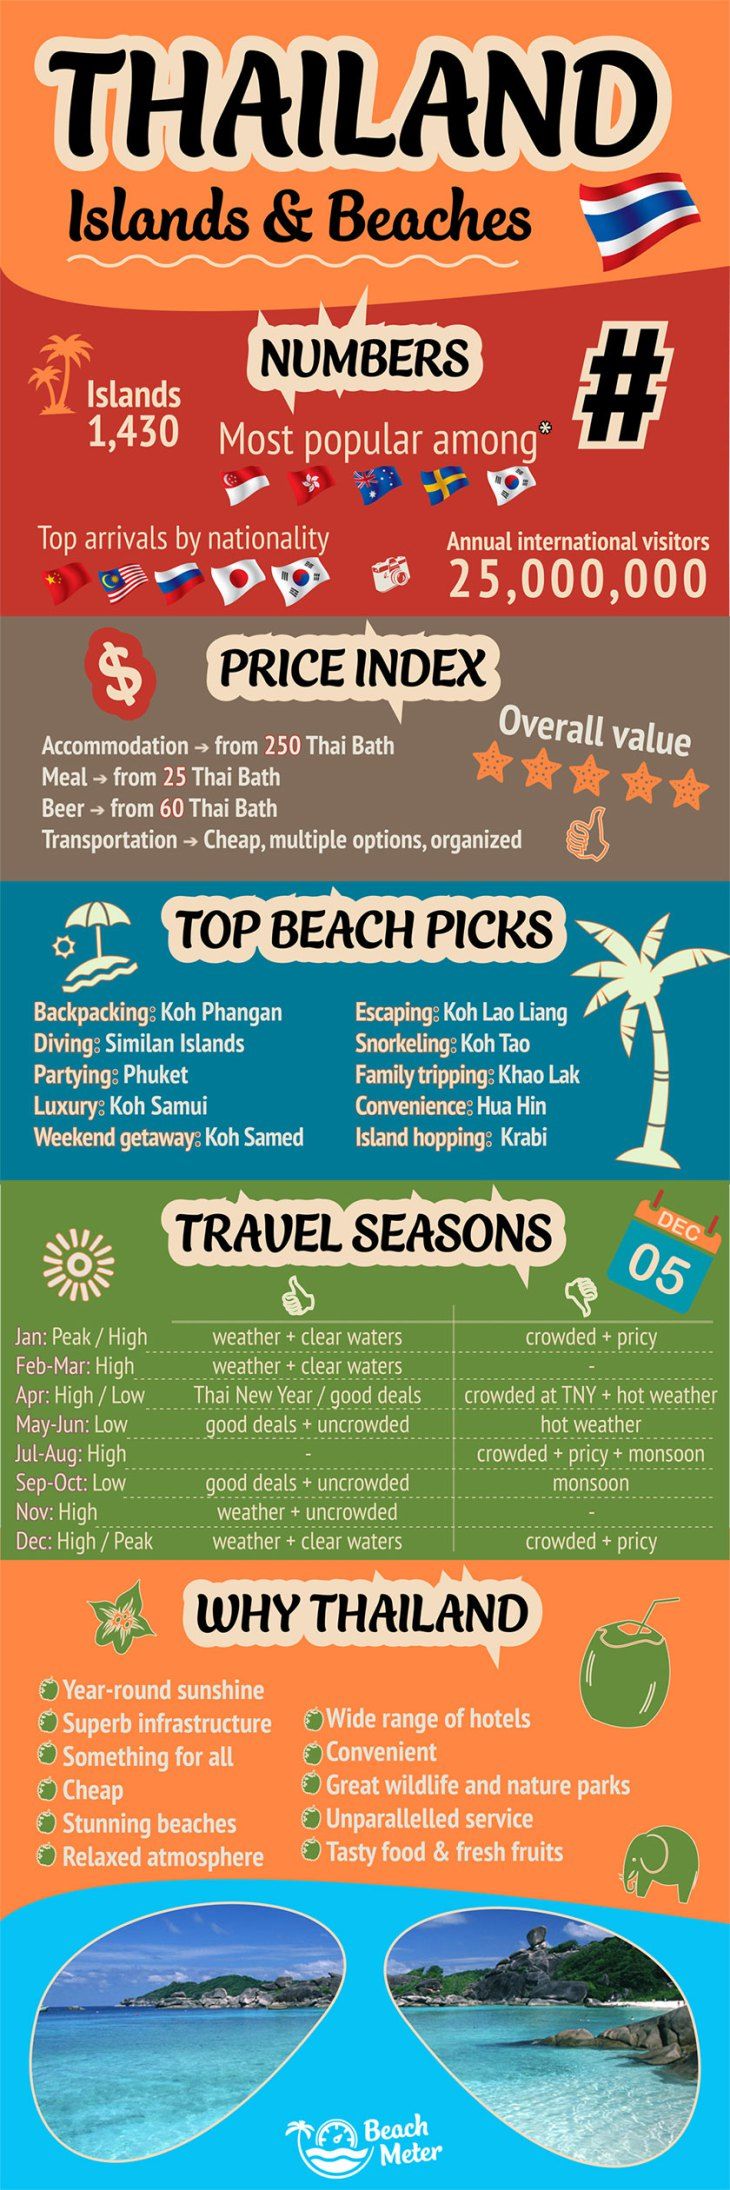 New Thailand Infographic and Destination Page - Beachmeter